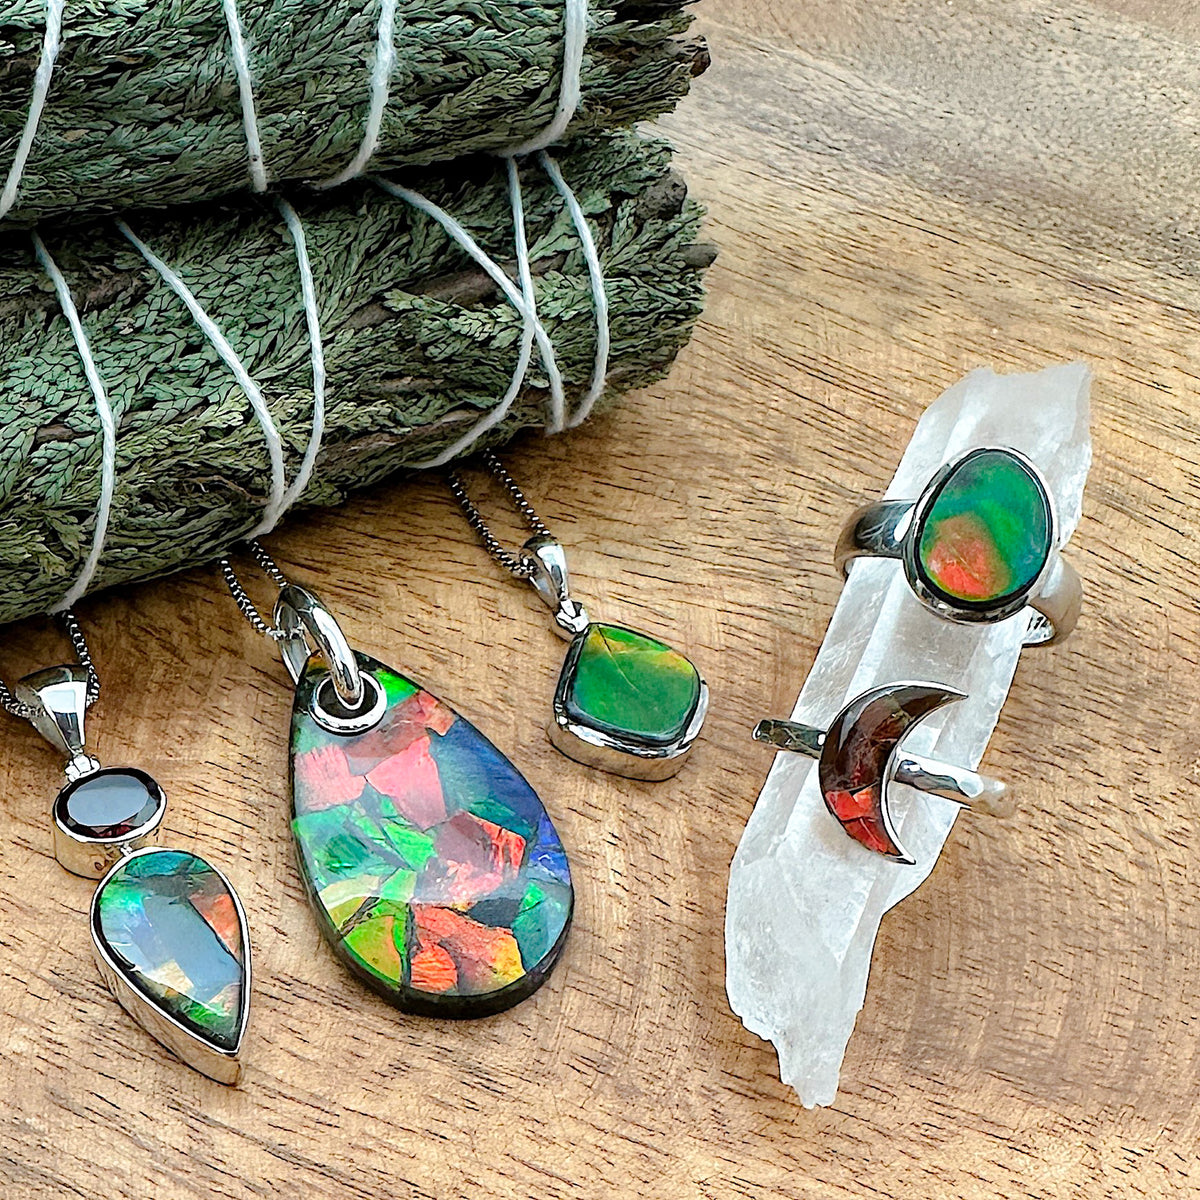 Various pieces of Ammolite jewelry laid out together against a wood background